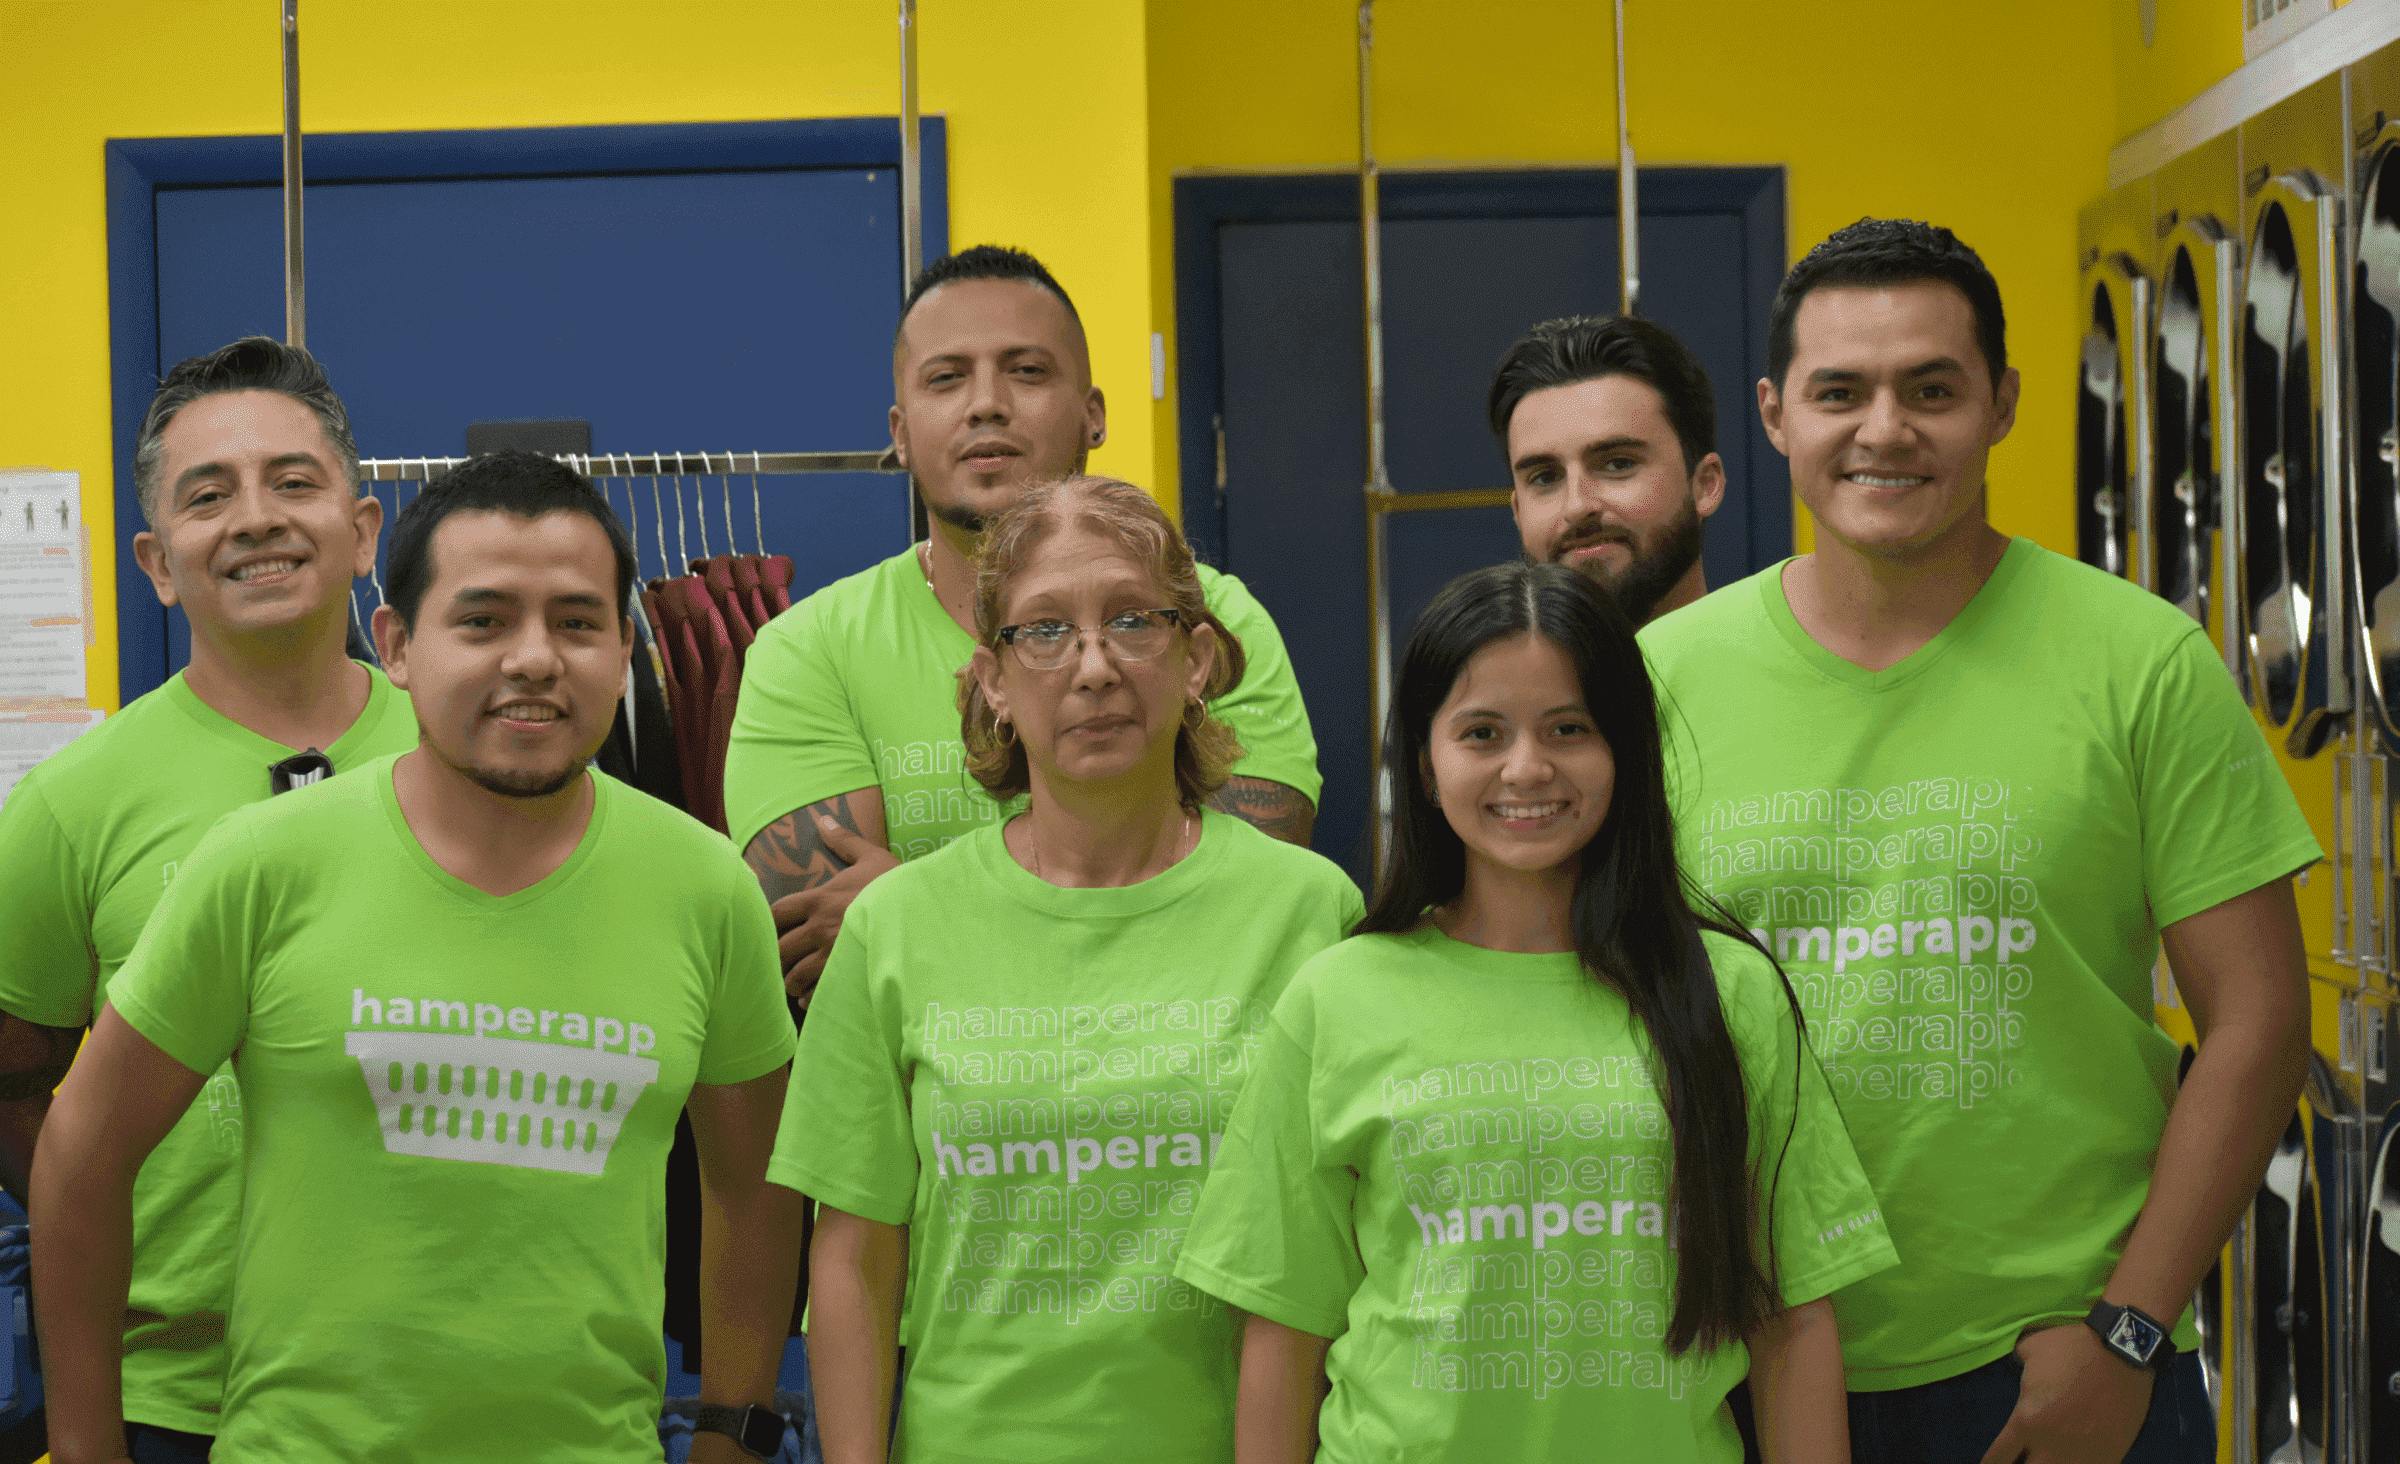 The Hamperapp company as a great example of the power of mobile app development in modern business operations